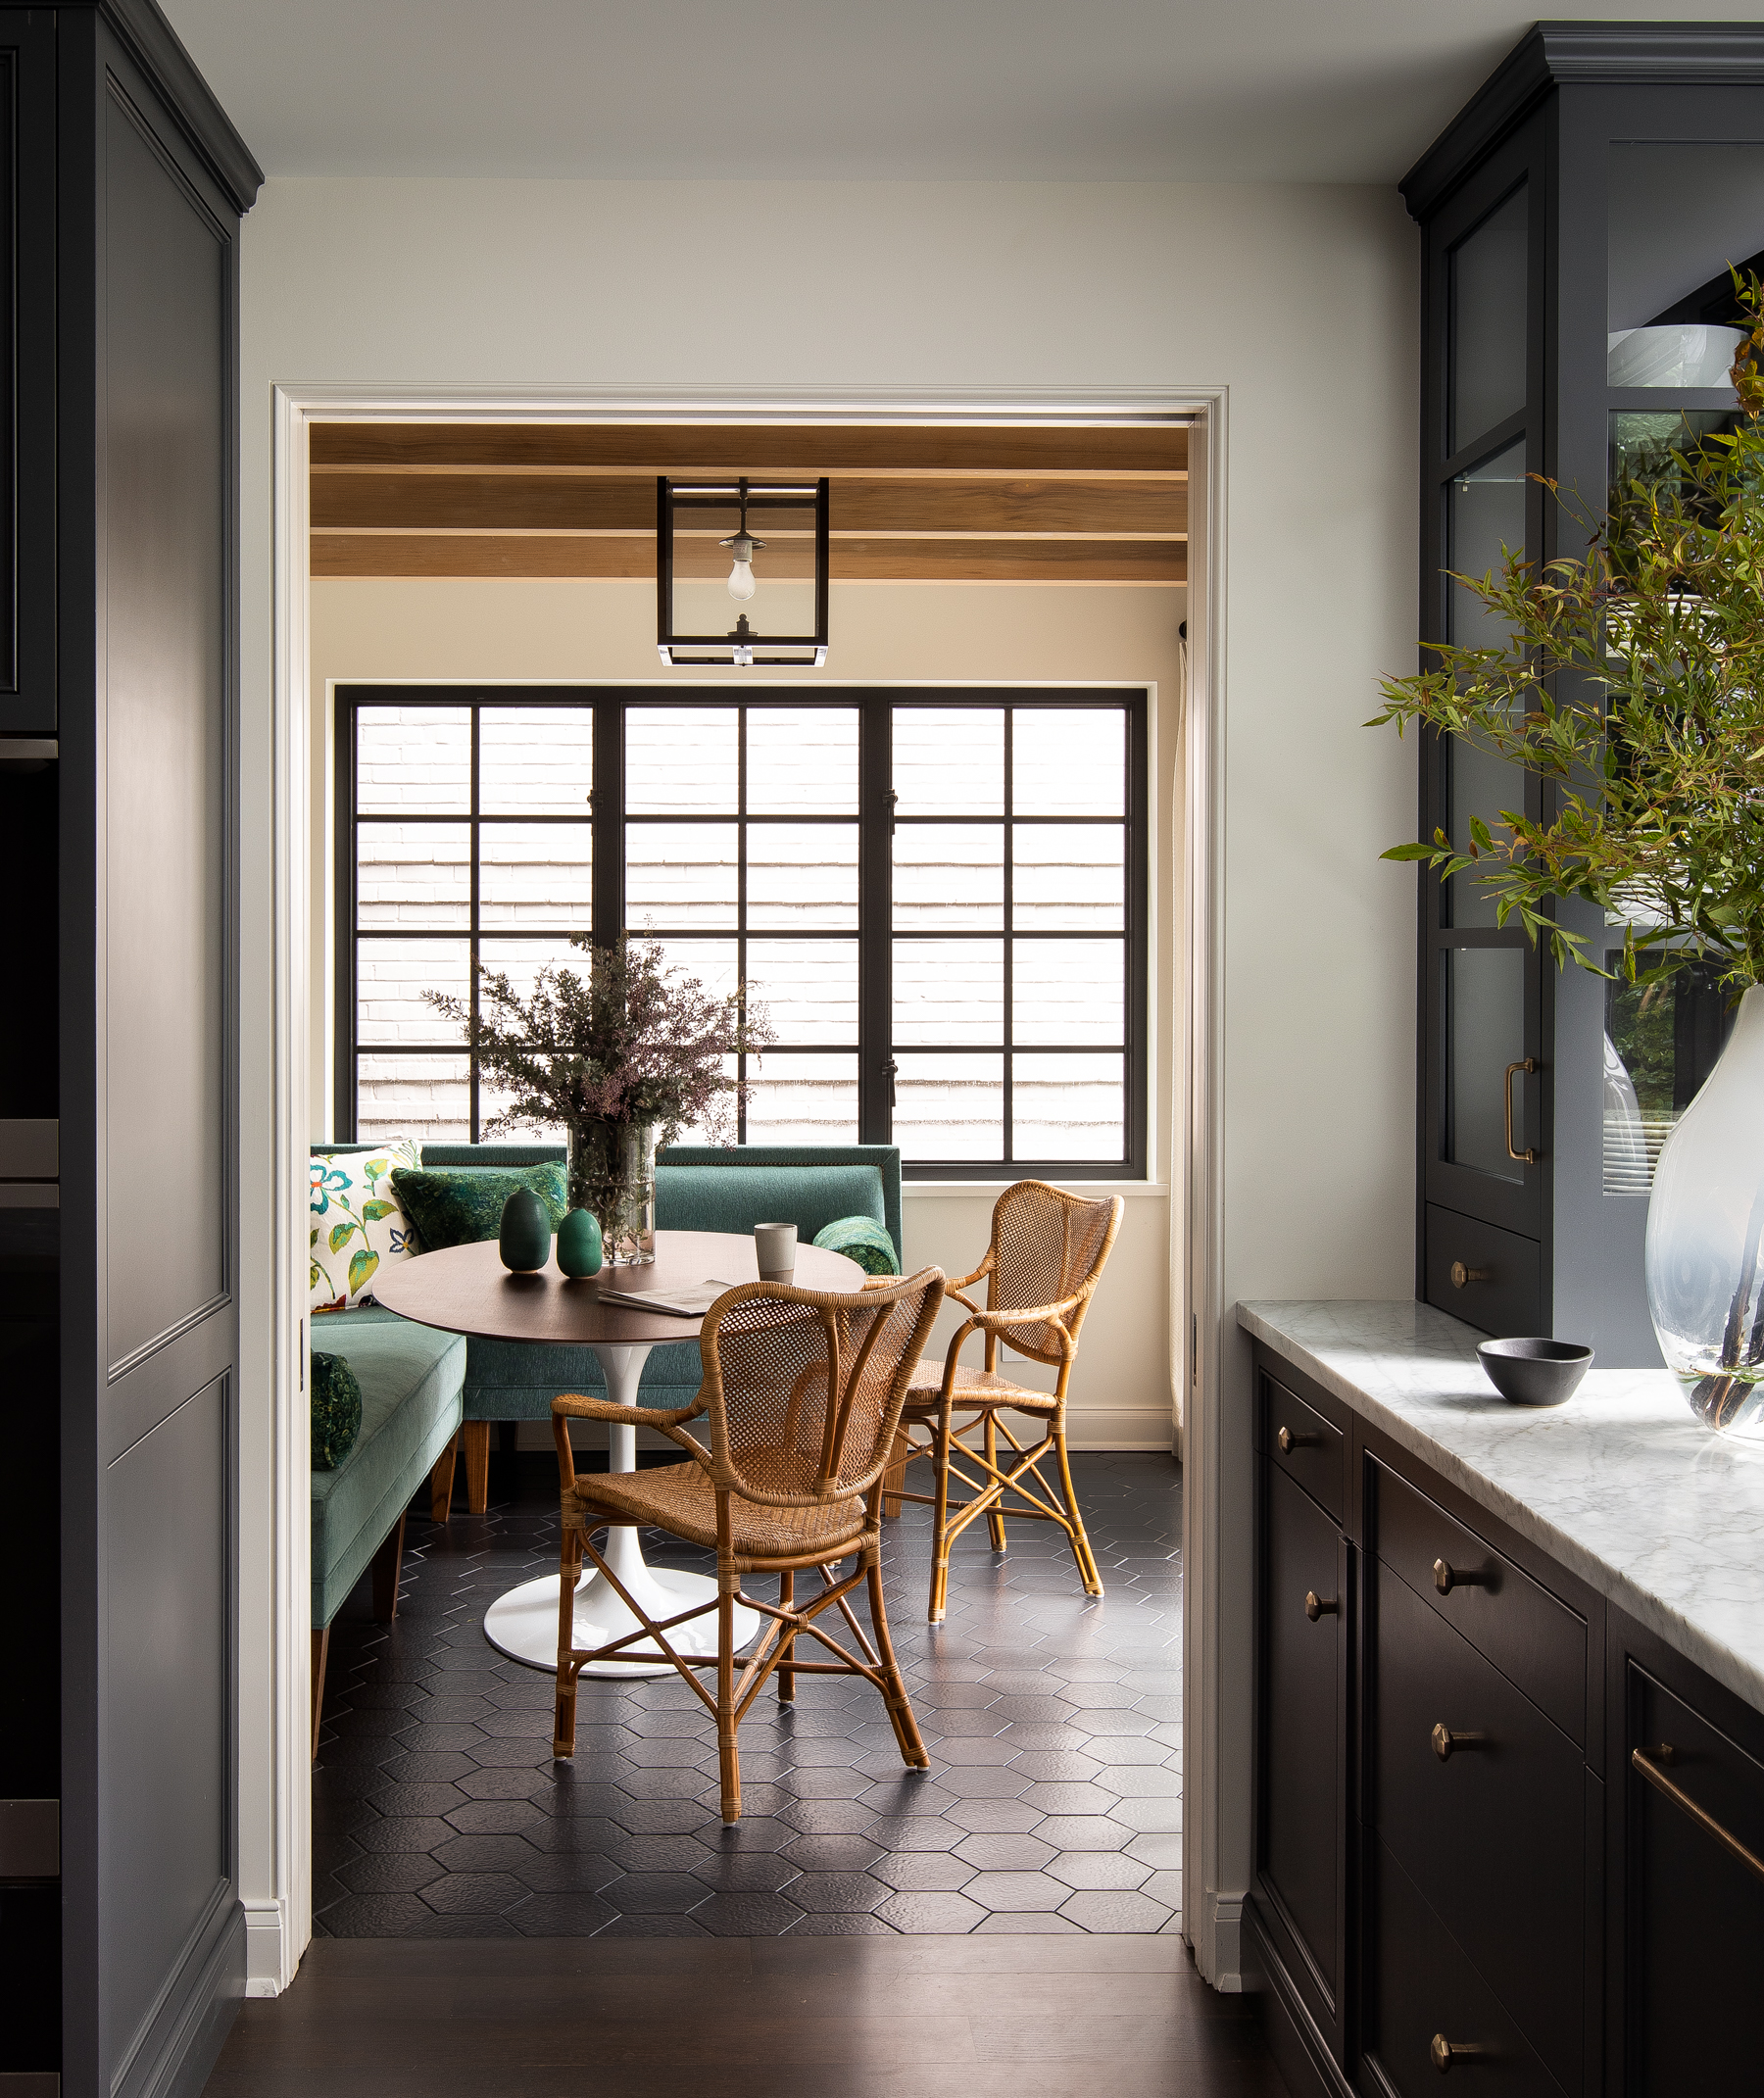 Sunroom: A bright, sunny space for breakfast with a comfortable L-shaped banquette along the wall and bamboo dining chairs for a casual dining experience.